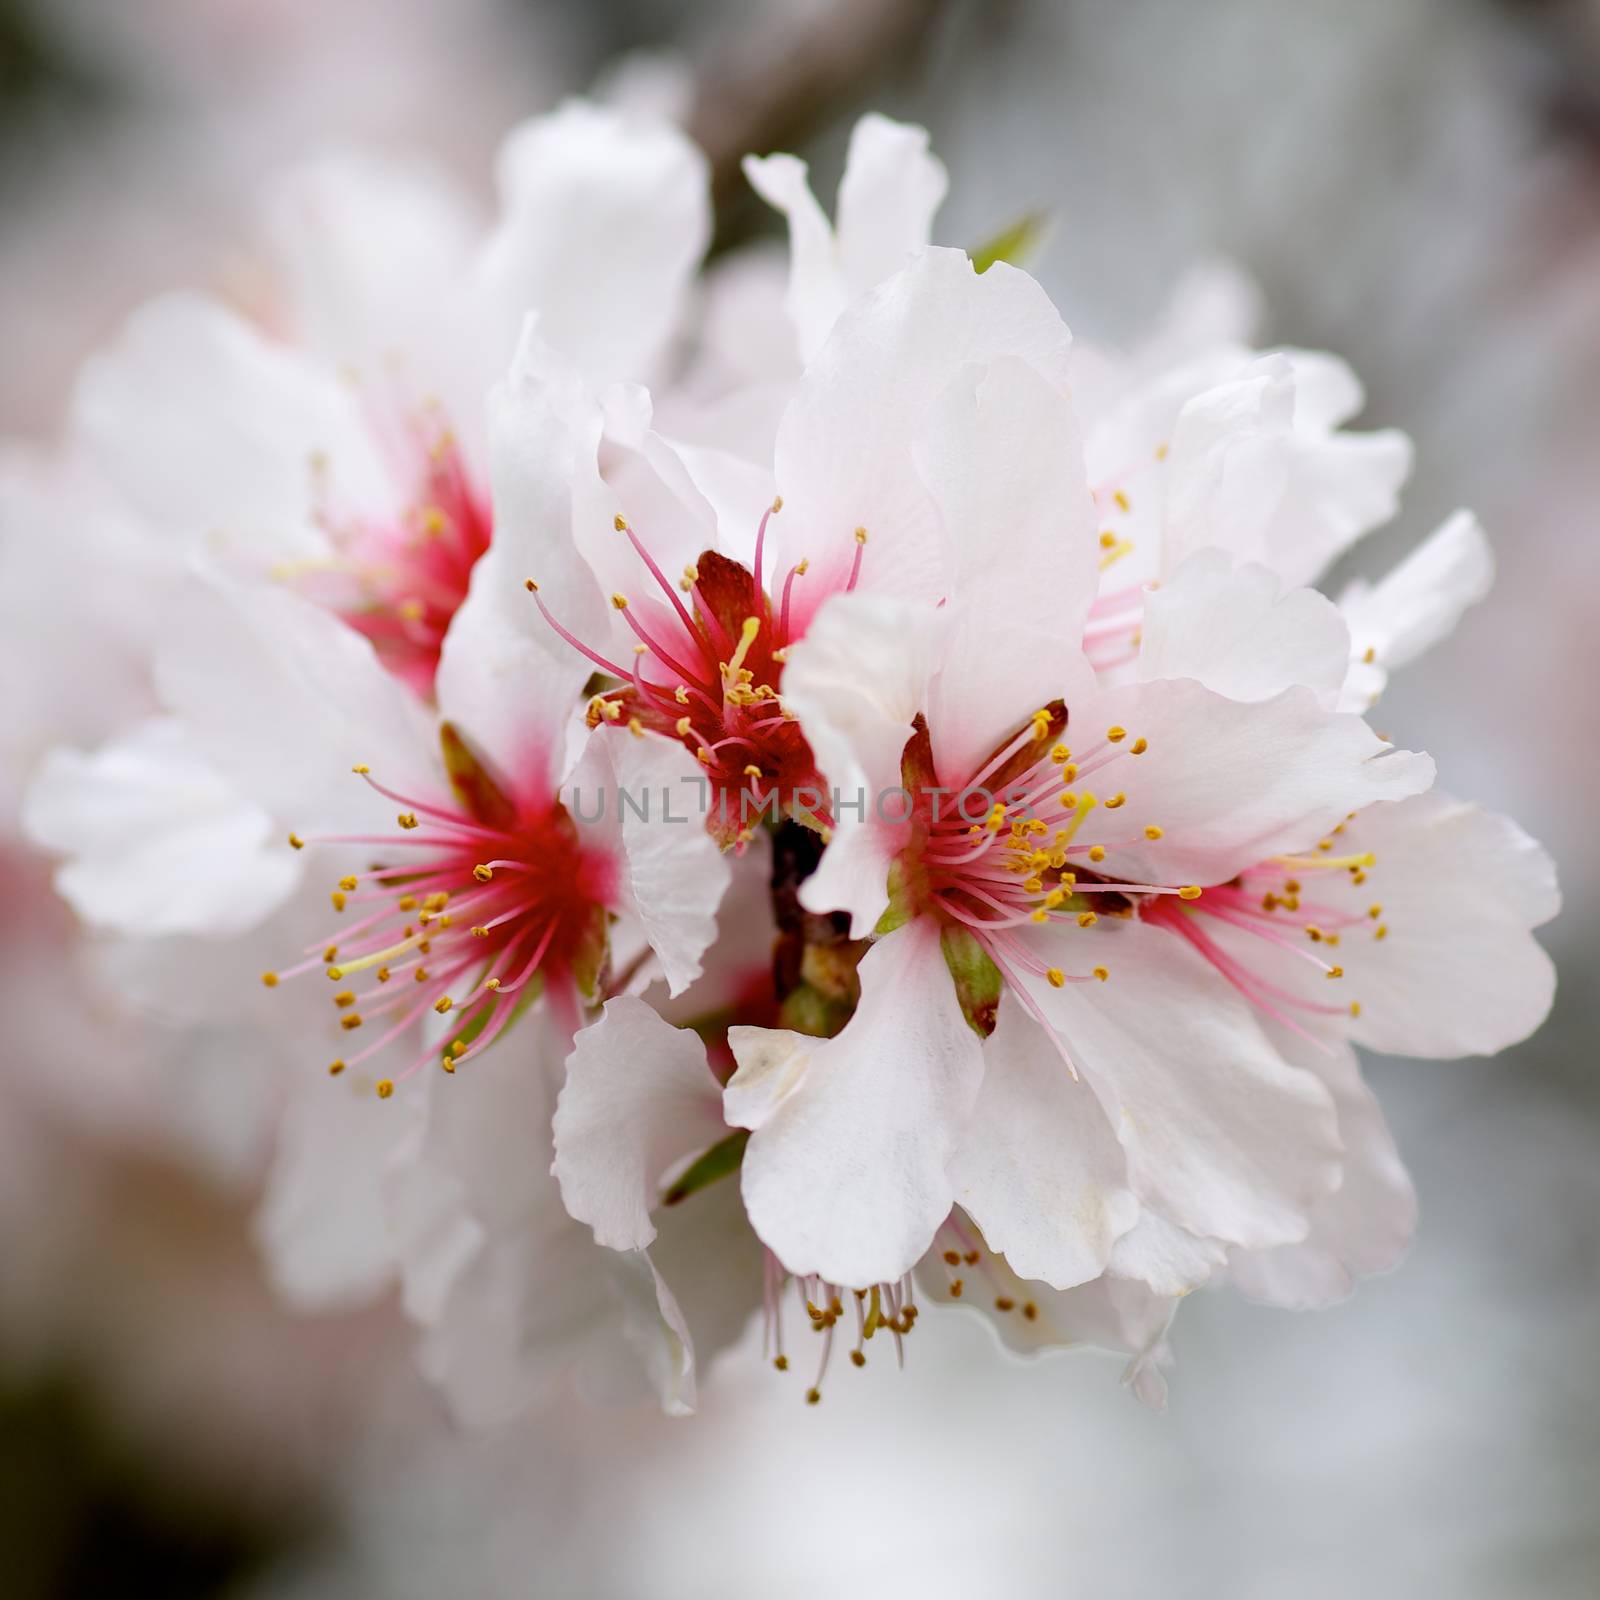 Beauty White and Red Cherry Blossoms on Blurred Cherry Tree Branches closeup. Focus on Pistil with Pollen